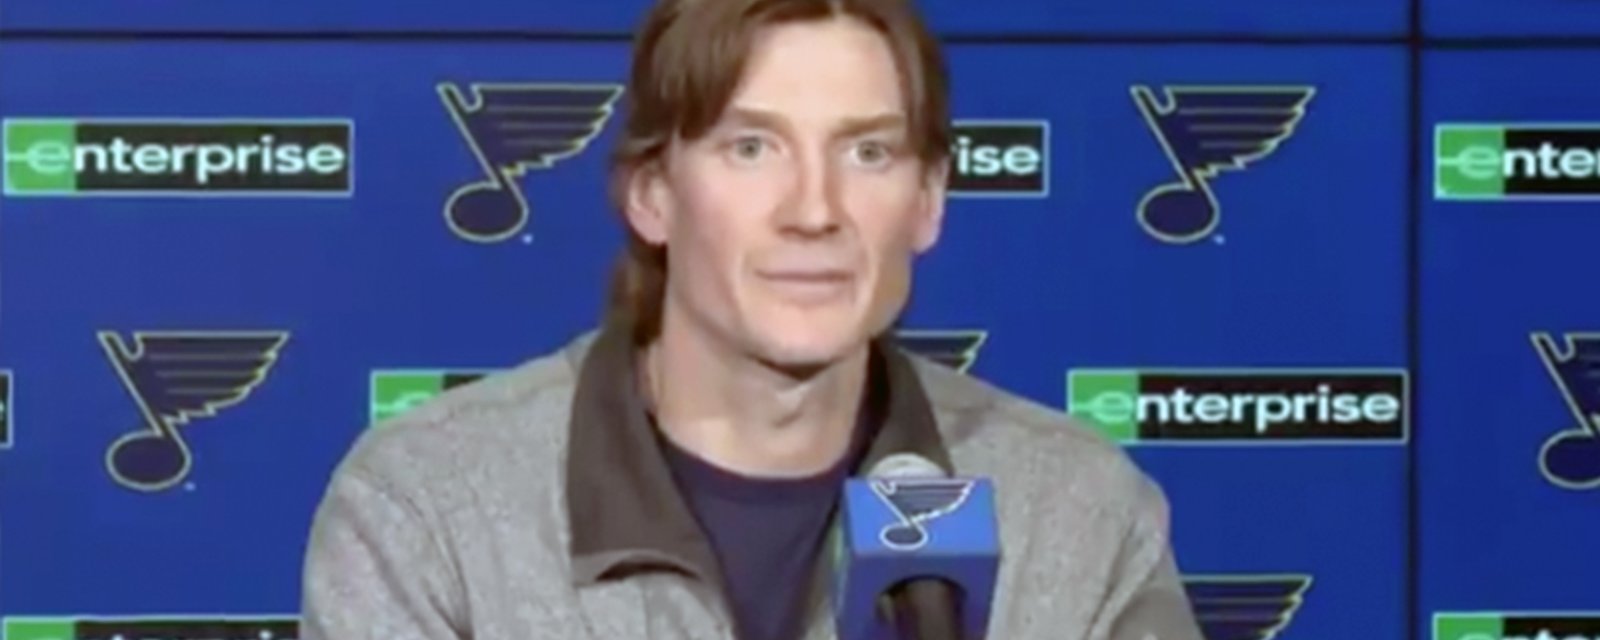 Bouwmeester confirms he won’t play this season, NHL future in doubt